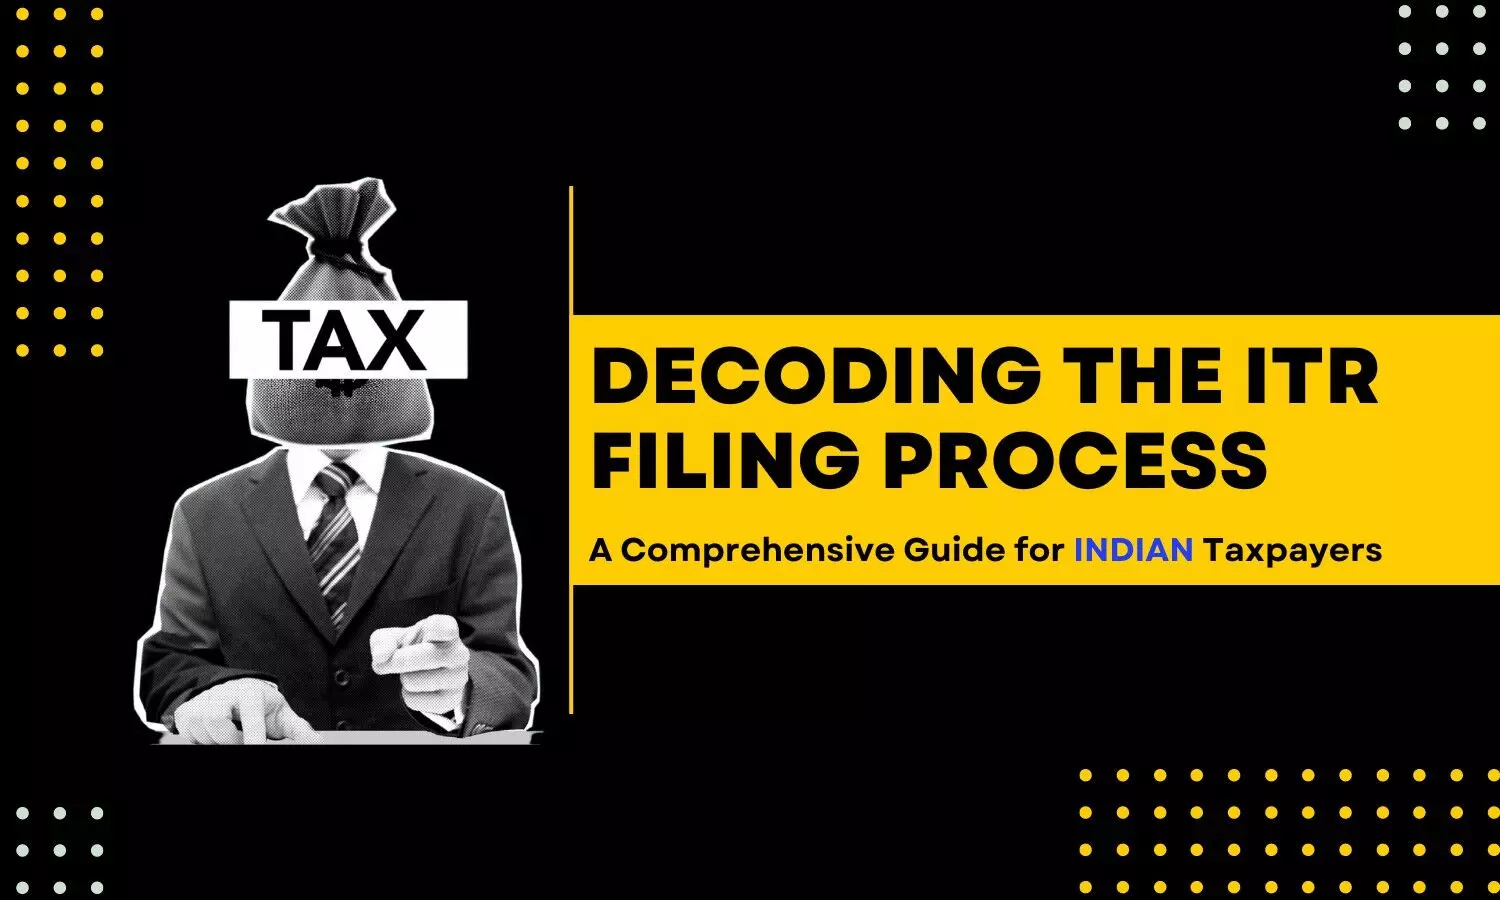 Decoding the ITR Filing Process: A Comprehensive Guide for Indian Taxpayers